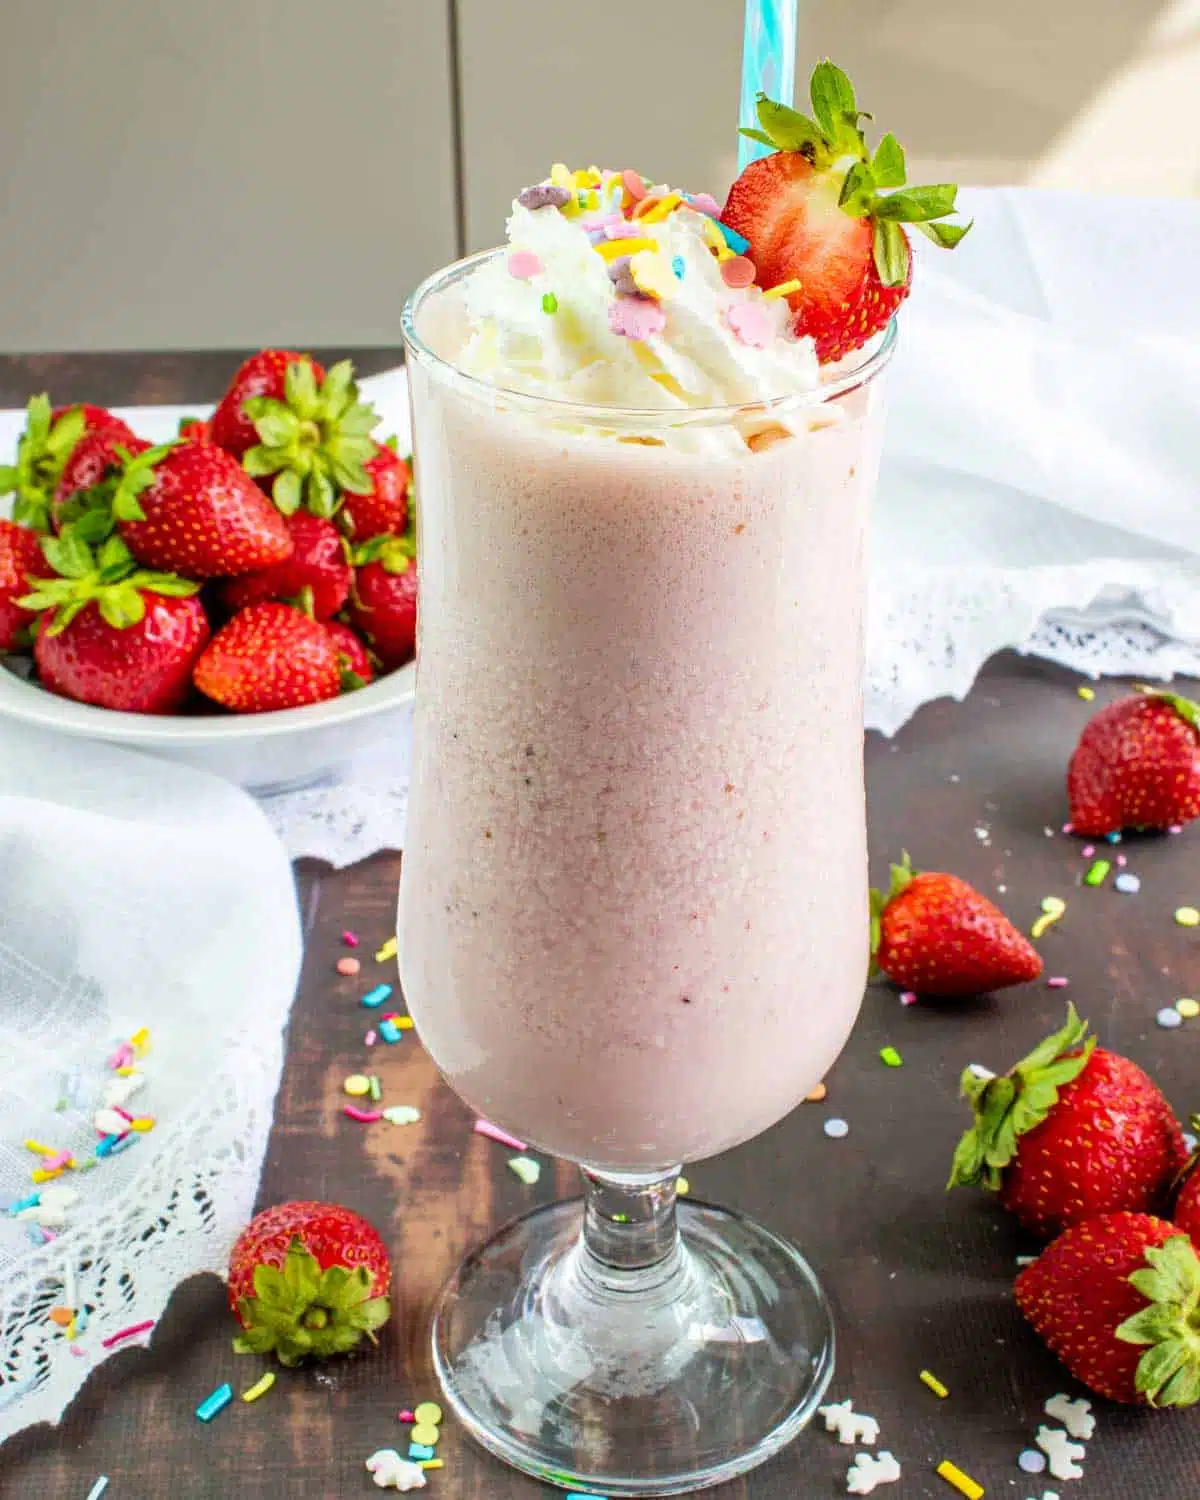 strawberry milkshake topped with whipped cream and sprinkles.